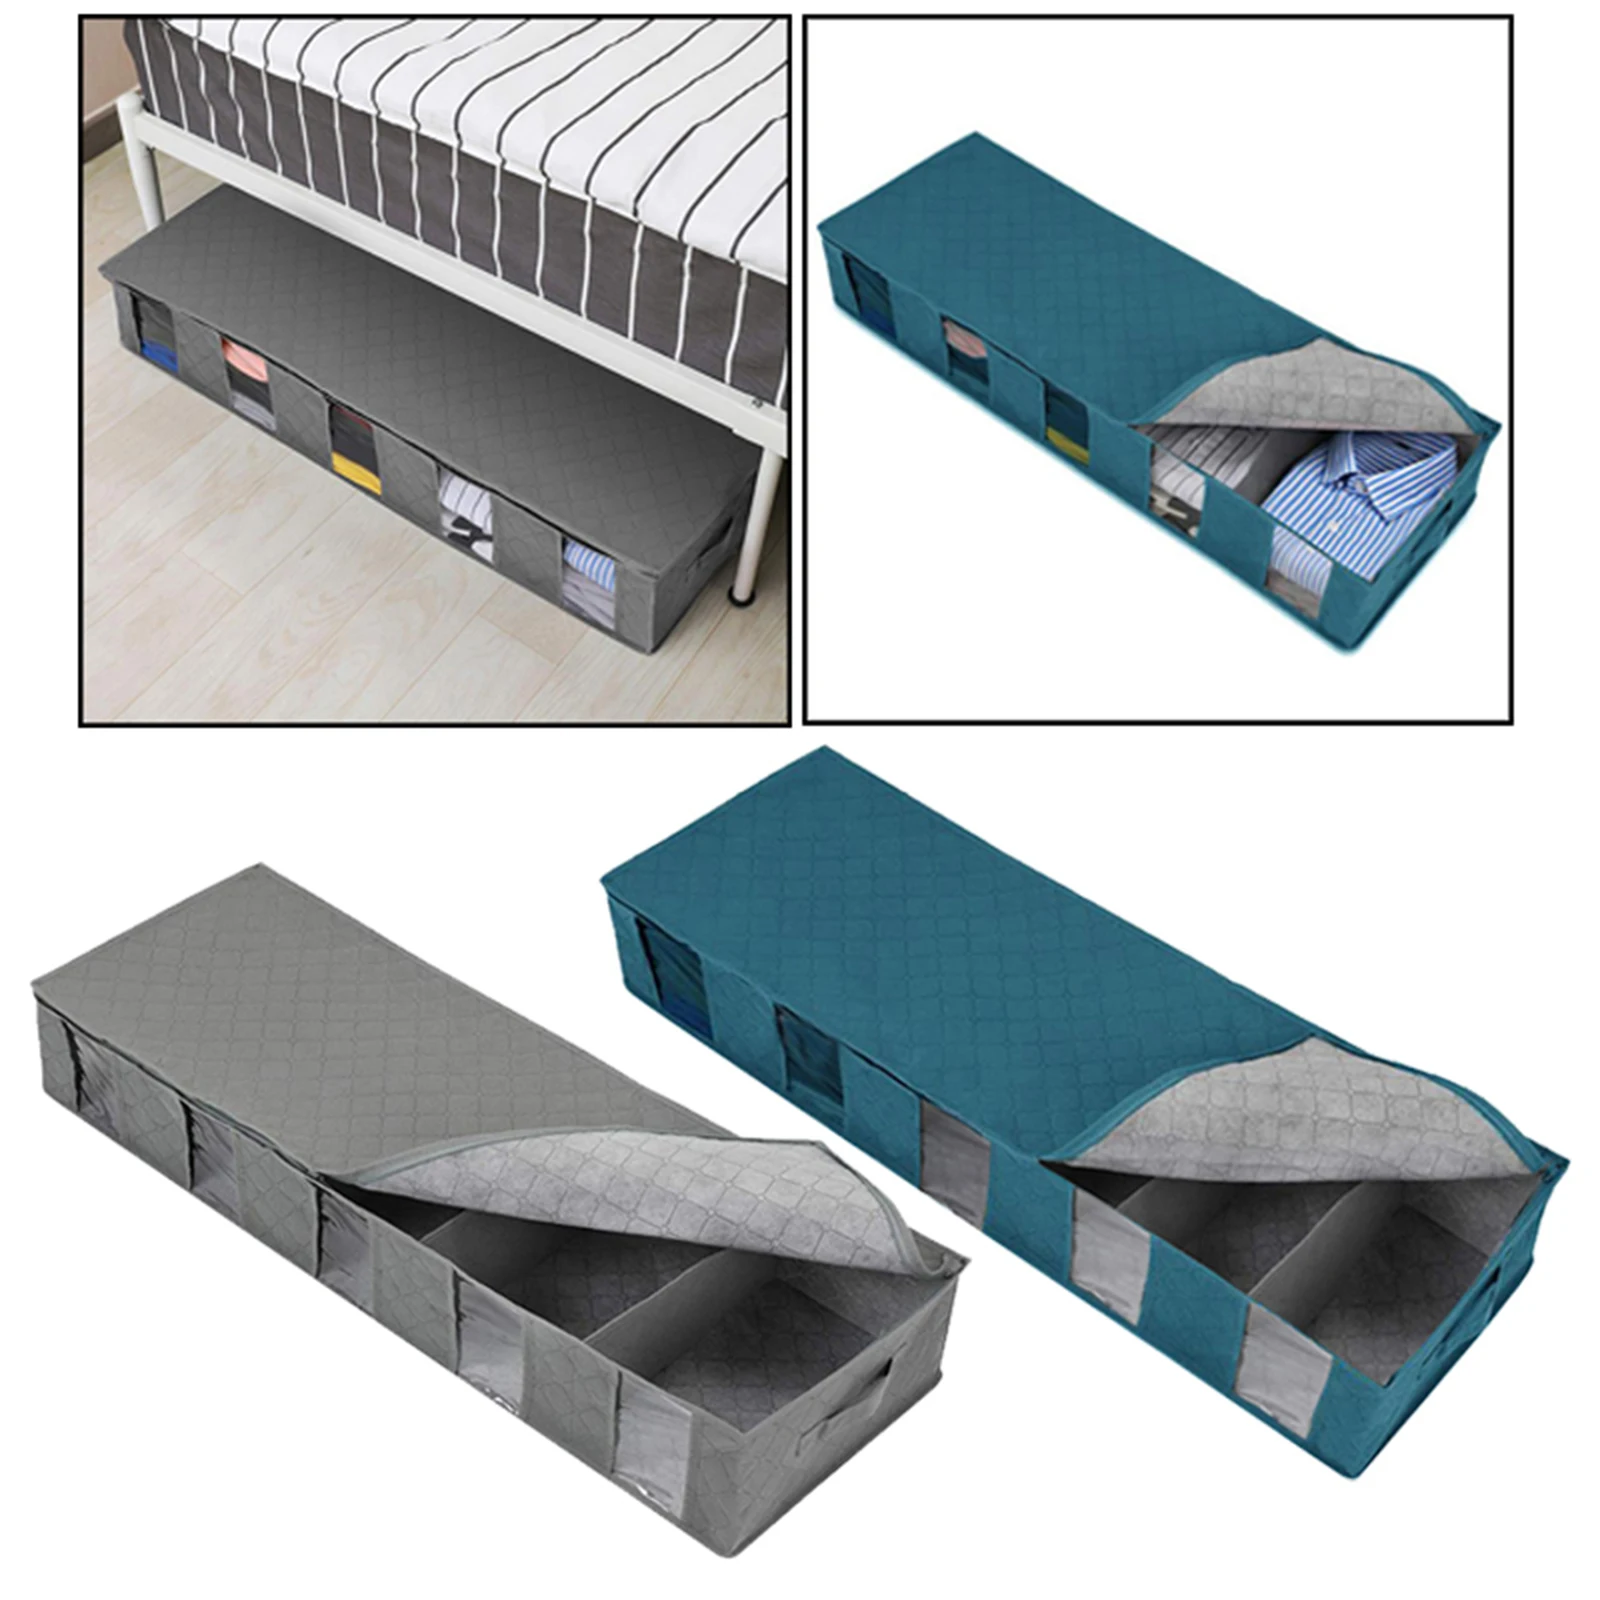 Foldable Under Bed Storage Bag Box Clothes Shoes Tidy Organizer for Dormitory, Basement, Attics